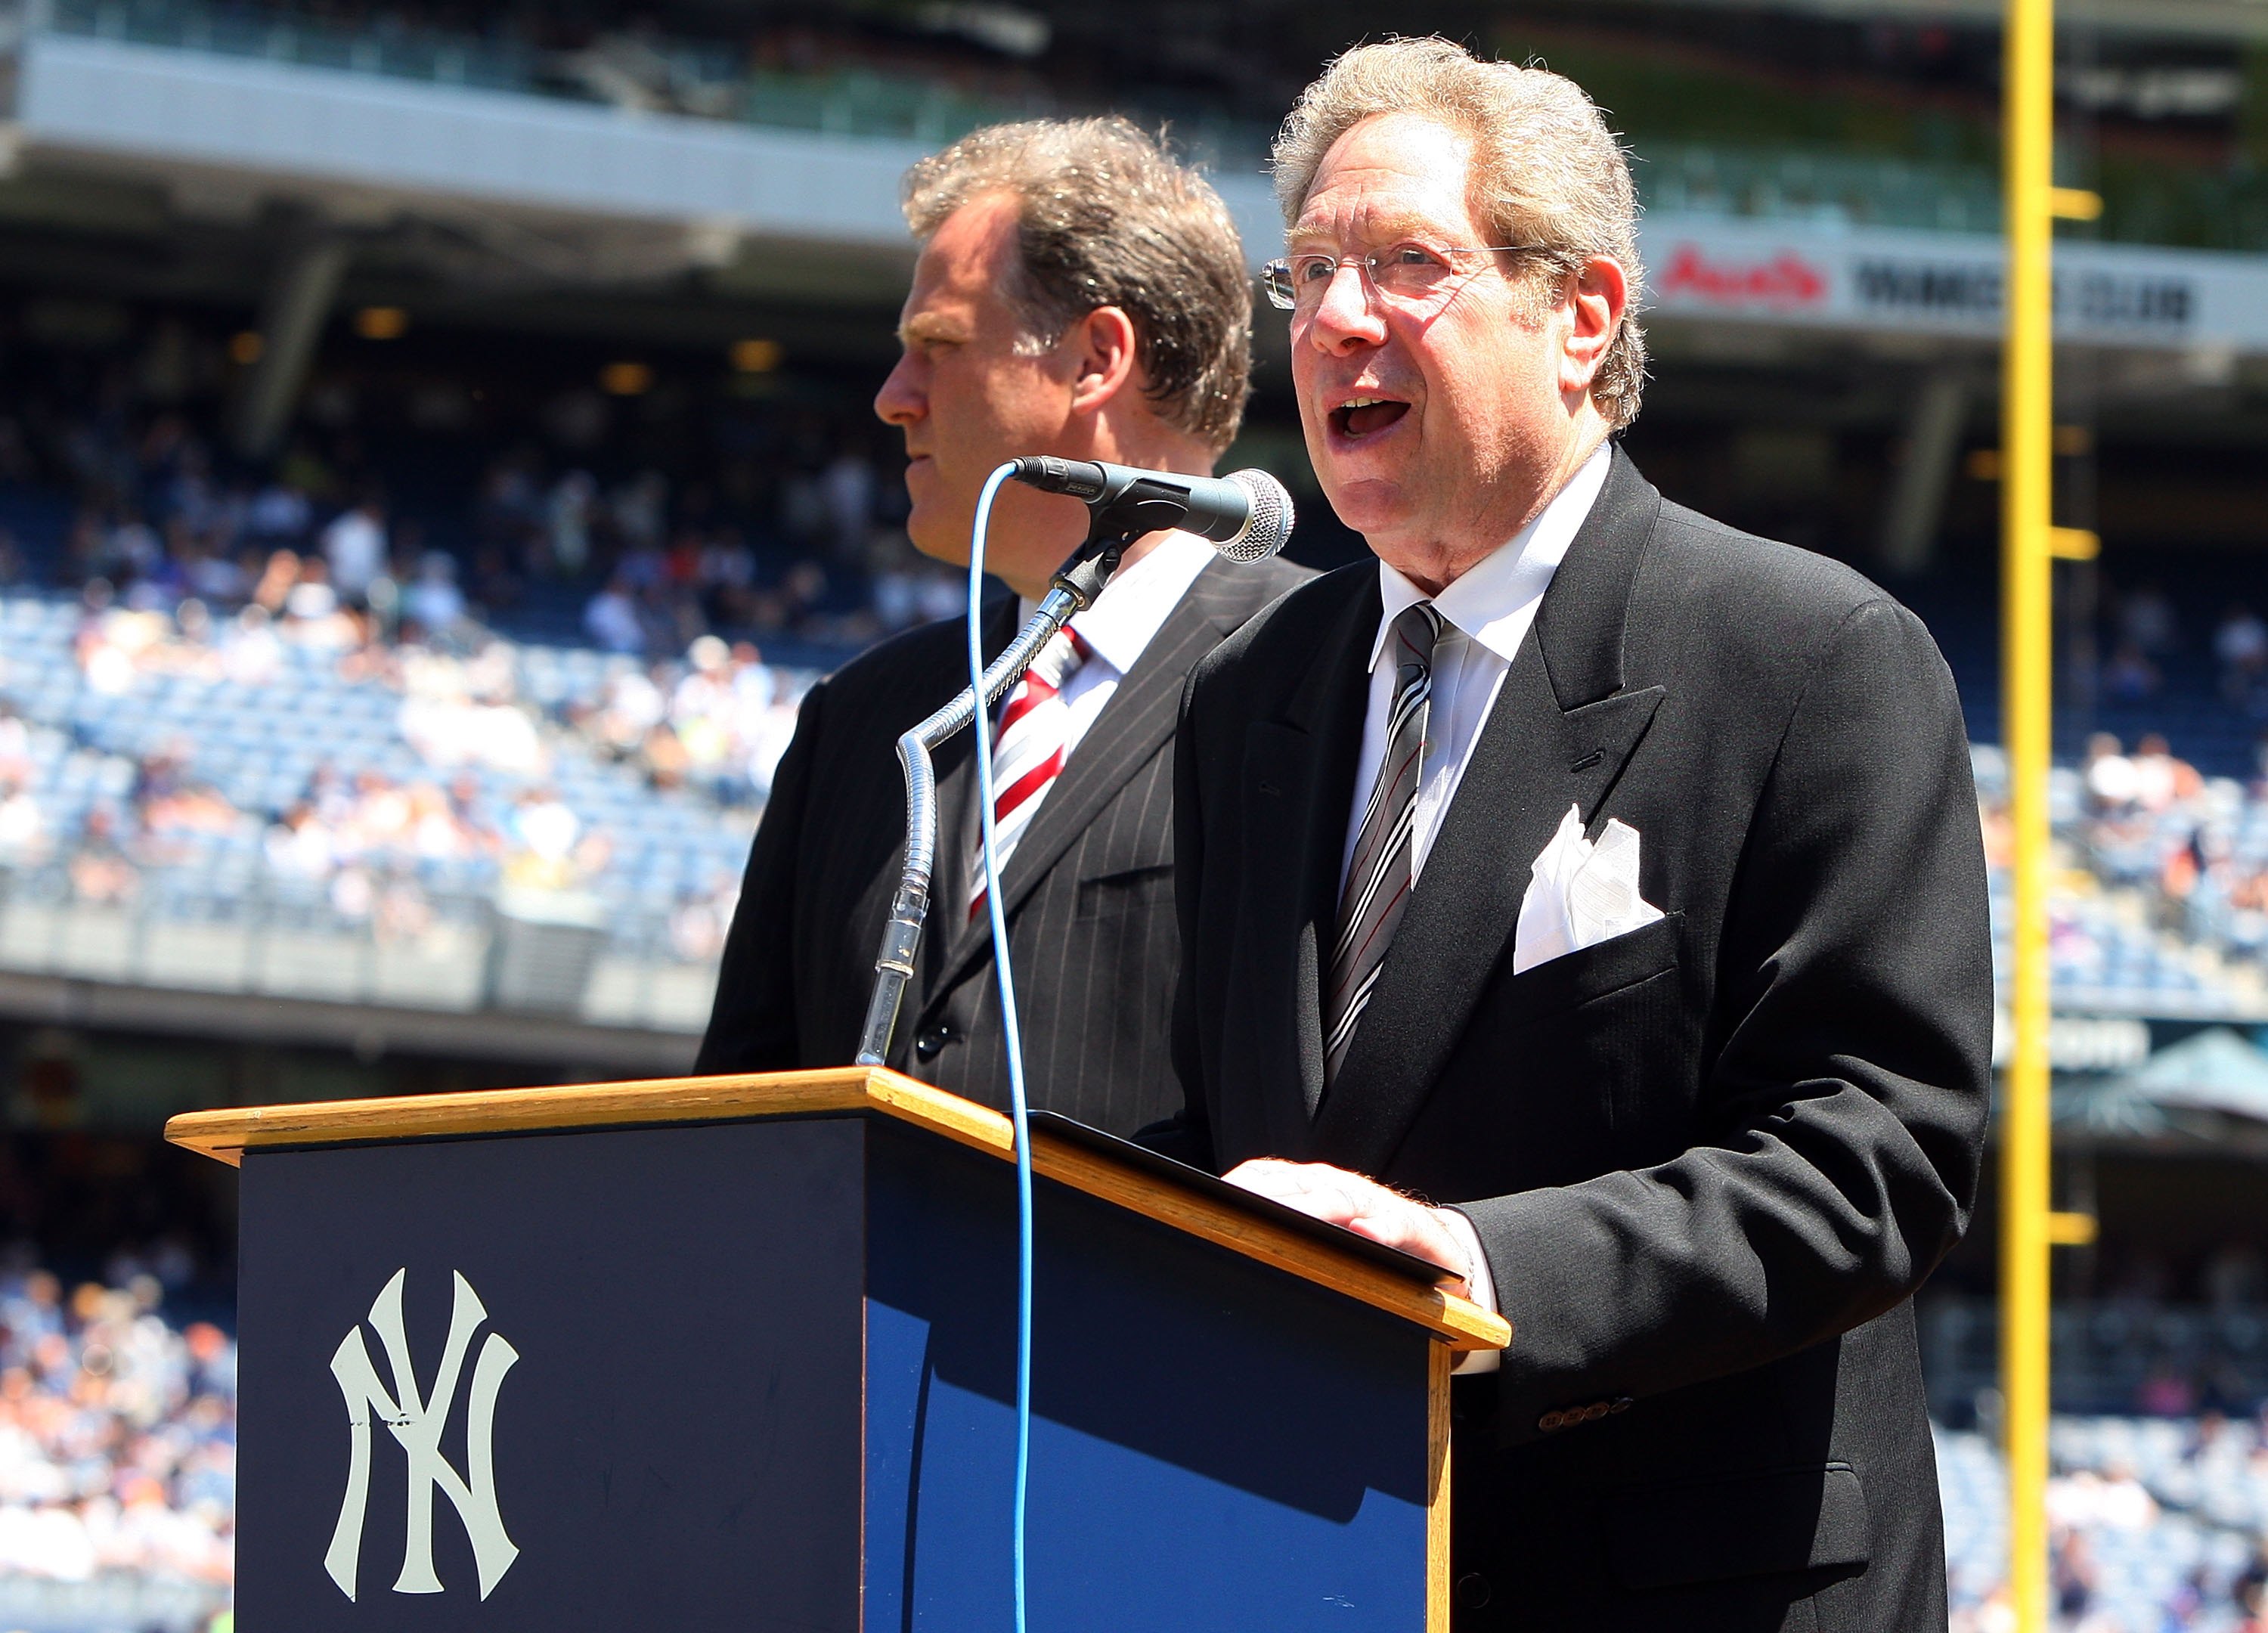 NEW YORK - JULY 19:  New York Yankees radio broadcaster John Sterling speaks during the teams 63rd Old Timers Day before the game against the Detroit Tigers on July 19, 2009 at Yankee Stadium in the Bronx borough of New York City.  (Photo by Jim McIsaac/G